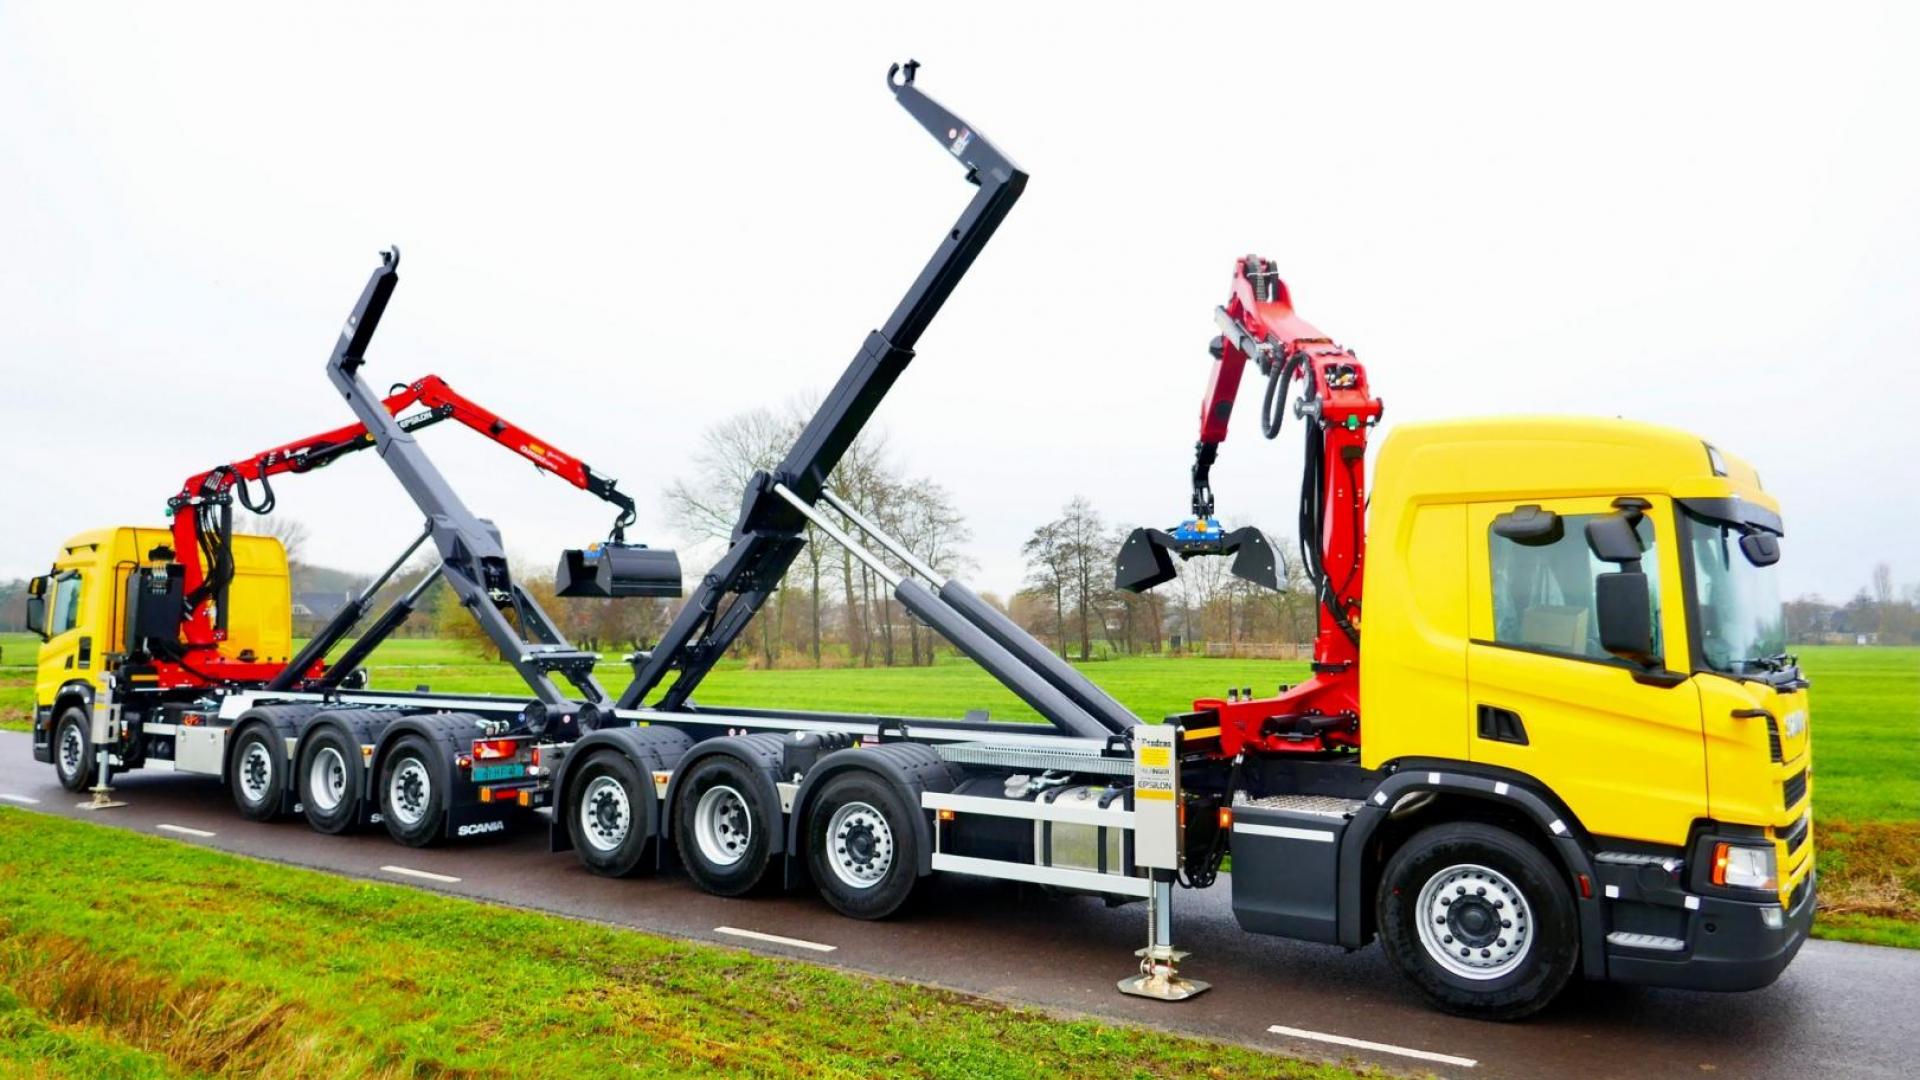 Two impressive crane-hooklift combinations were built and delivered by our dealer Rondaan